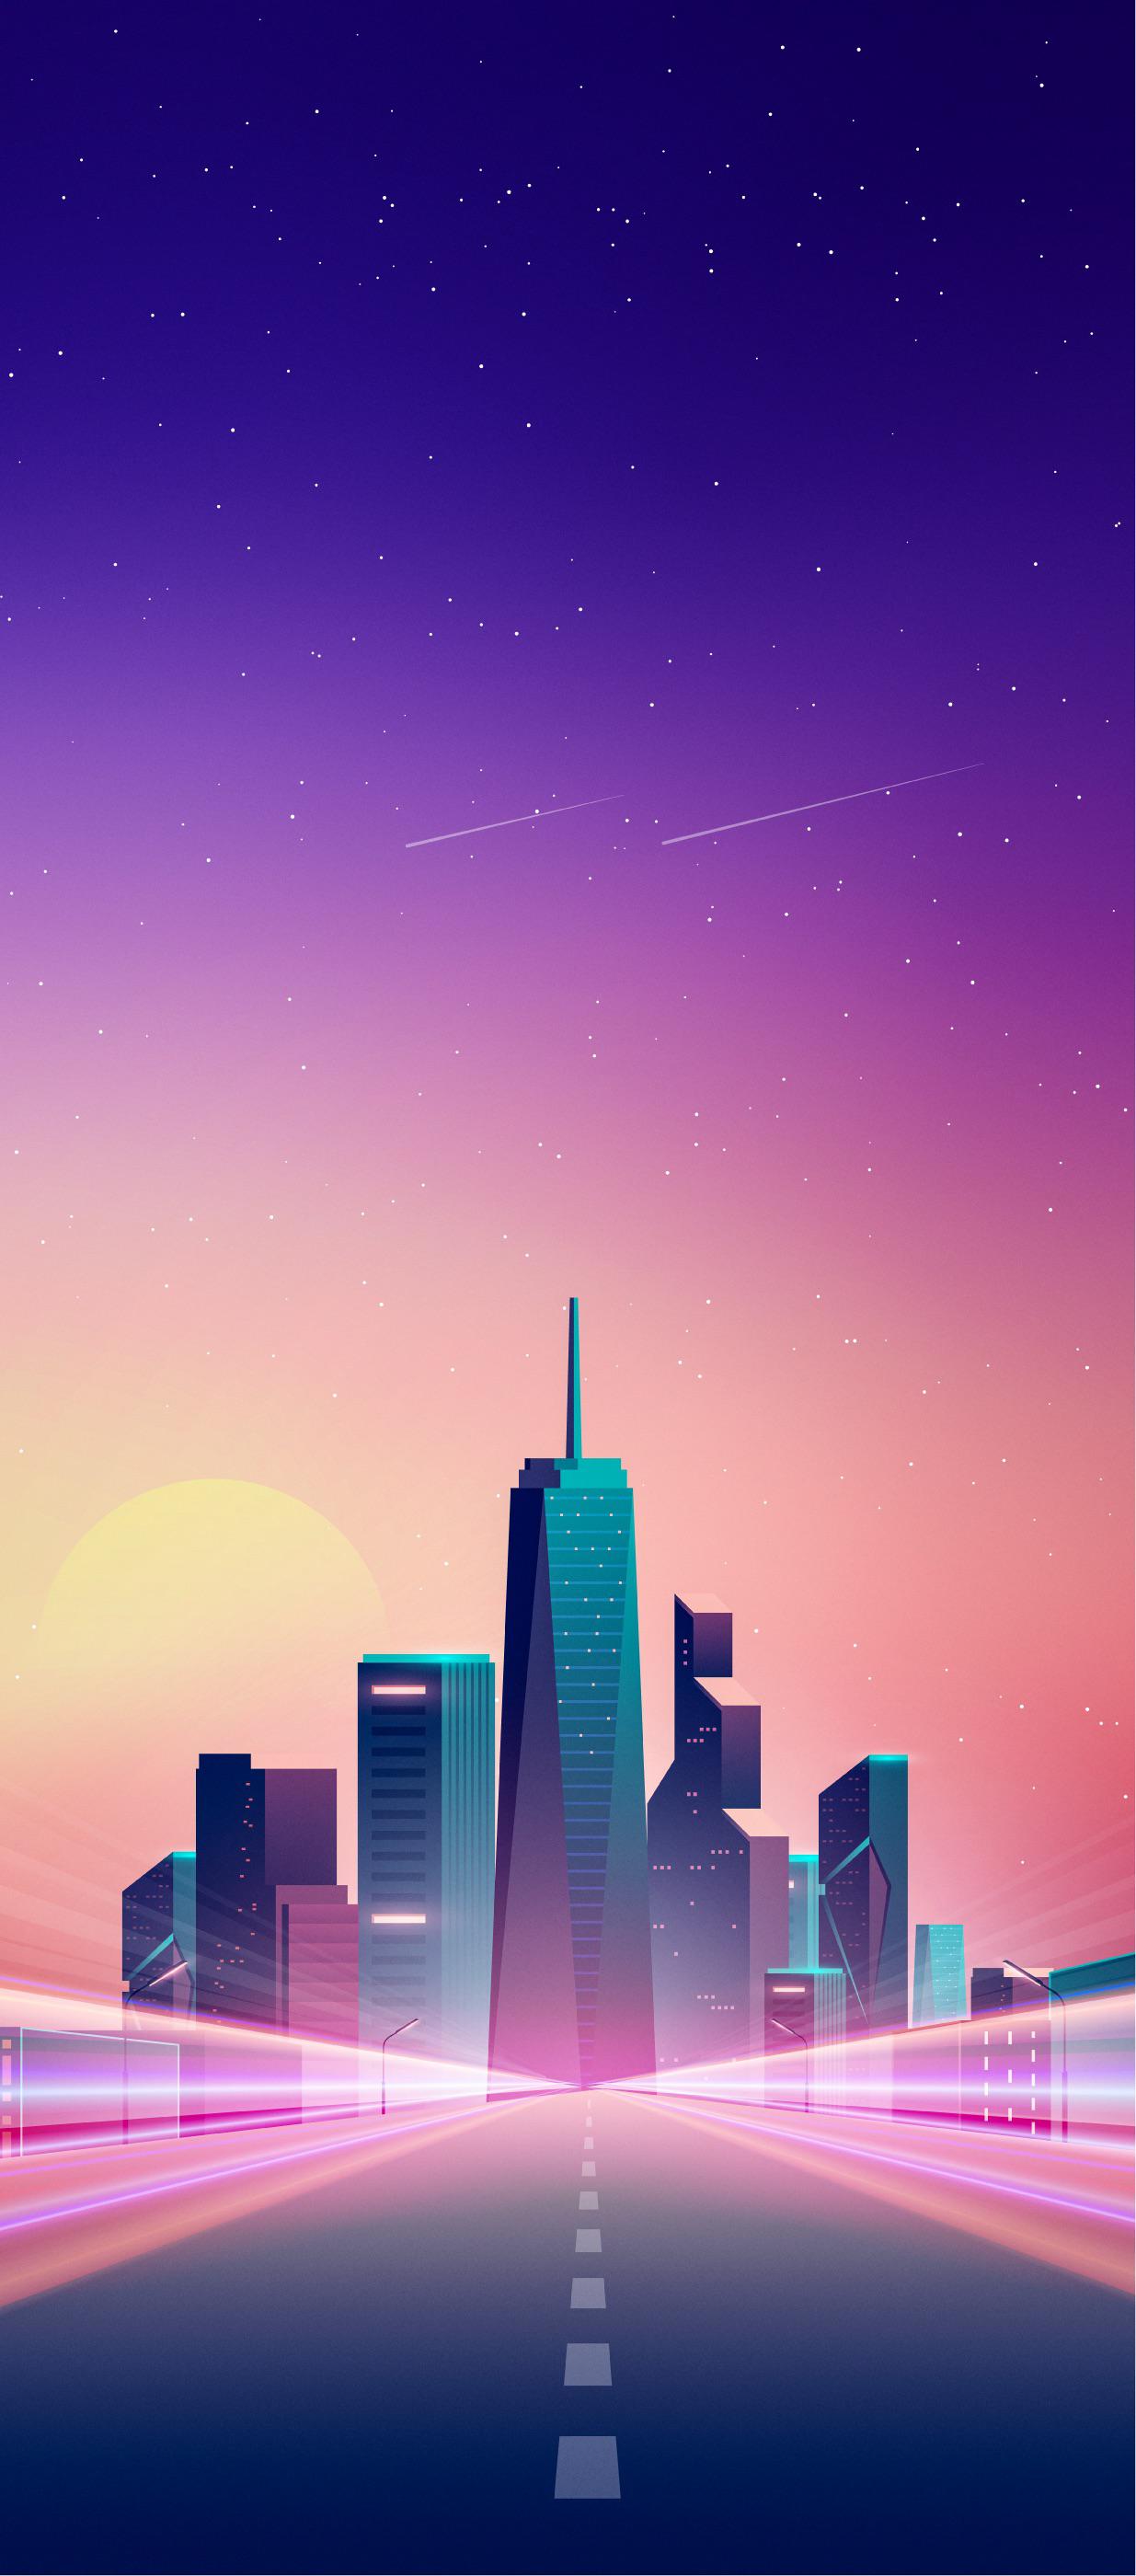 NYC Gradient: Telegram with other wallpaper in comments: iWallpaper